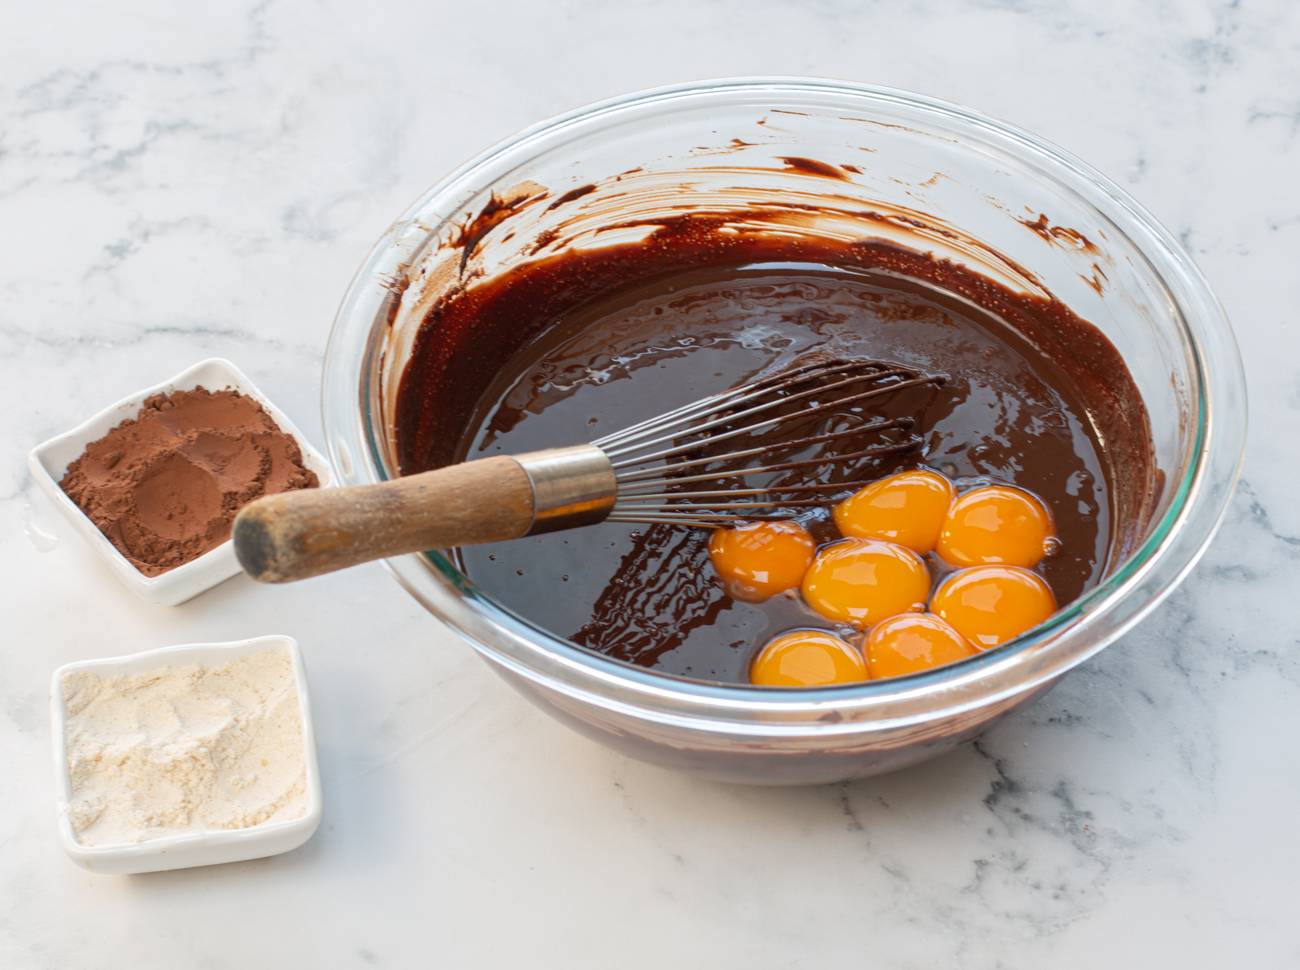 Add egg yolks to chocolate and butter mixture 